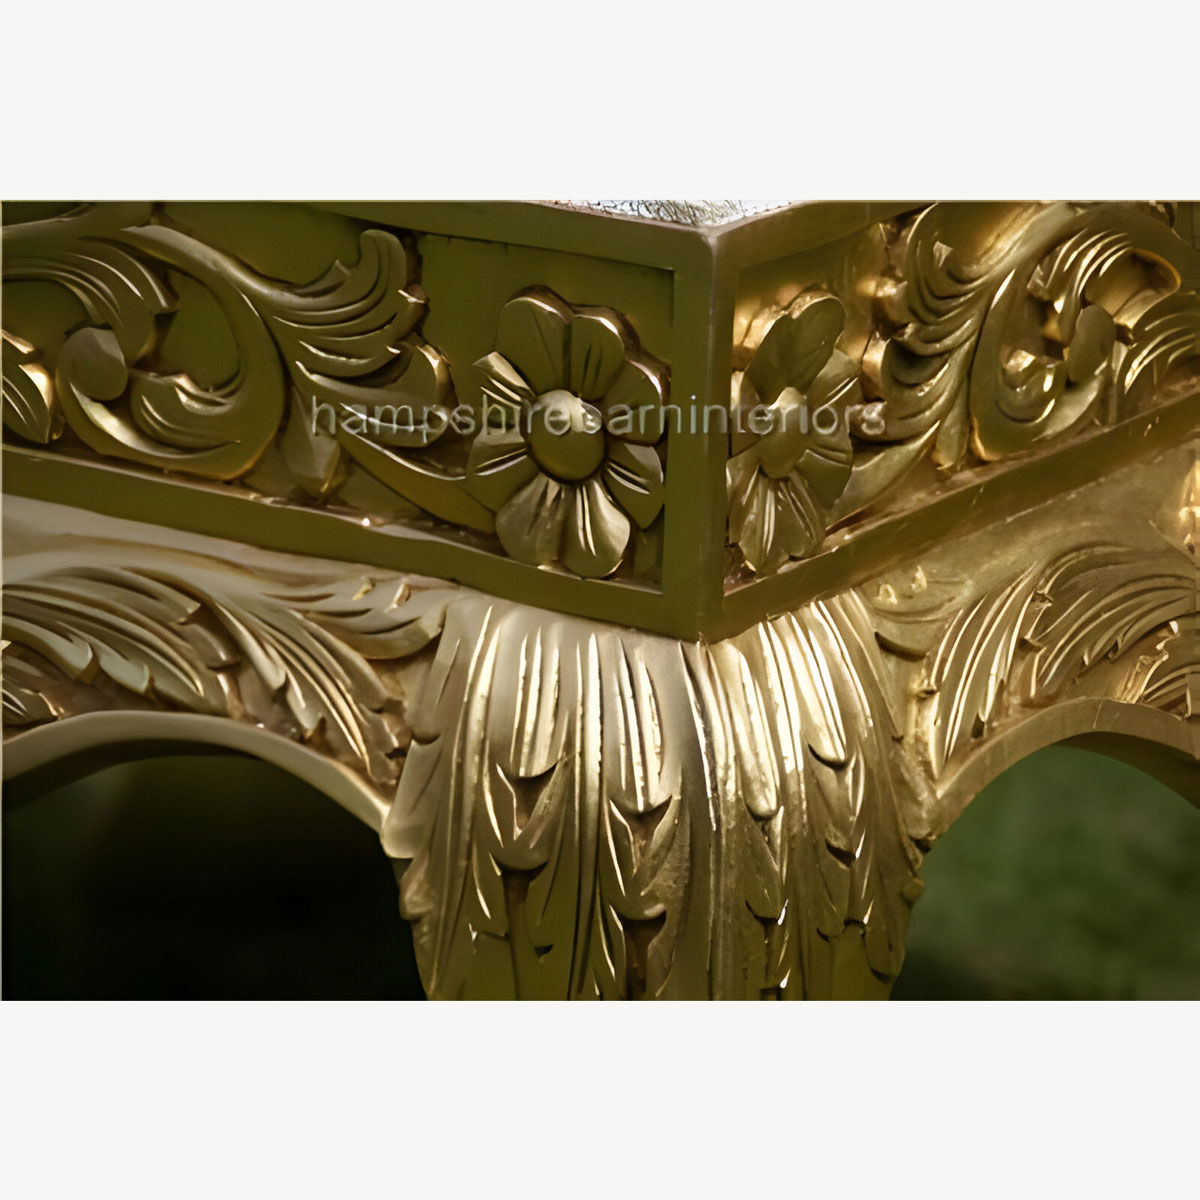 A Gold Leaf Heavily Carved Wedding Or Event Or Home Stool Ottoman Seat 5 - Hampshire Barn Interiors - A Gold Leaf Heavily Carved Wedding Or Event Or Home Stool / Ottoman Seat -